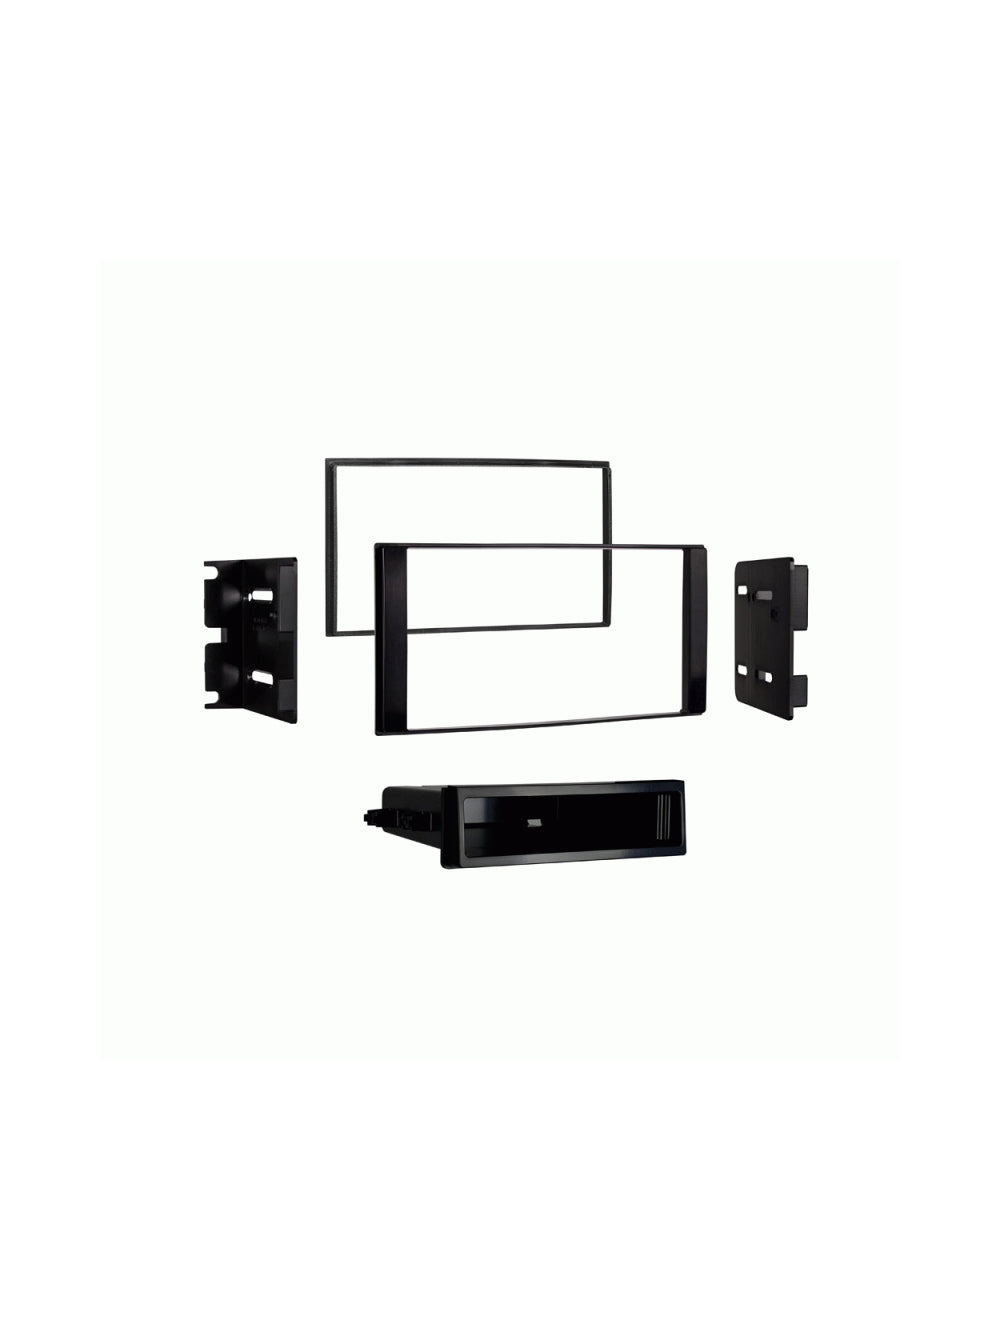 Metra 99-7623 Double DIN Dash Kit for Select 2014-Up Nissan NV200 Vehicles Black